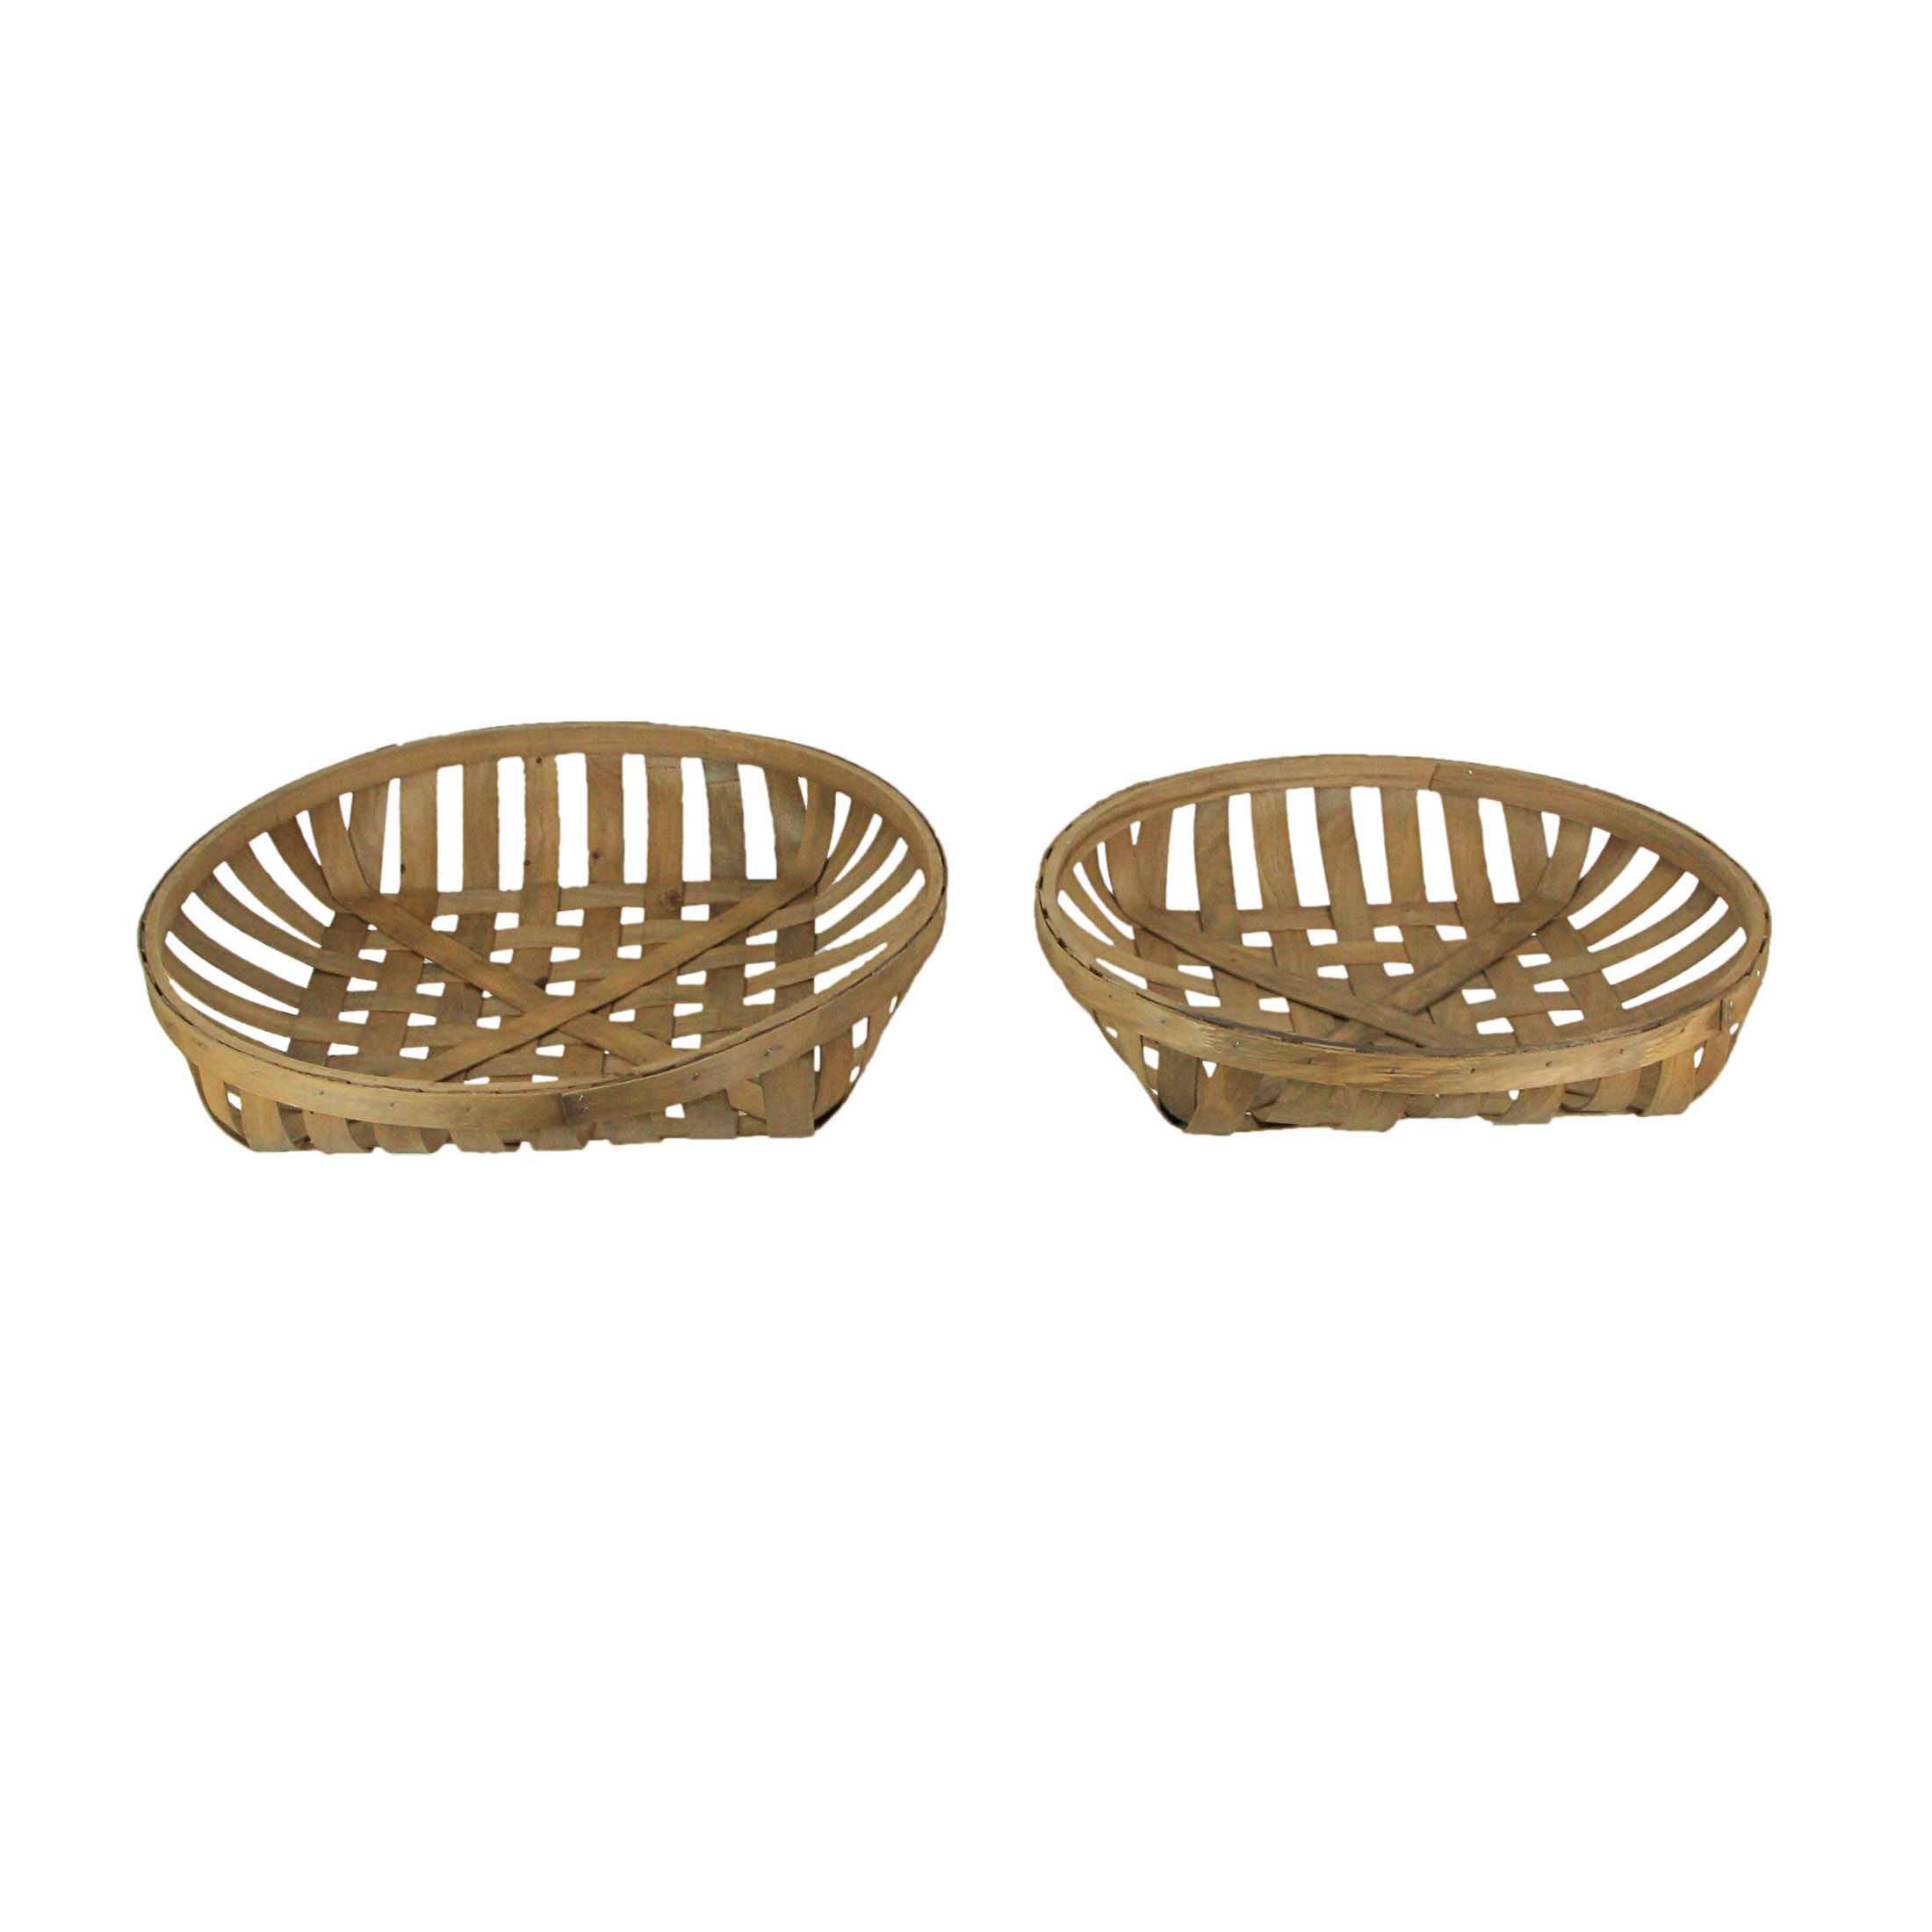 Audreys Round Natural Woven Wood Tobacco Basket Tray Decorative Serving Display Set of 2